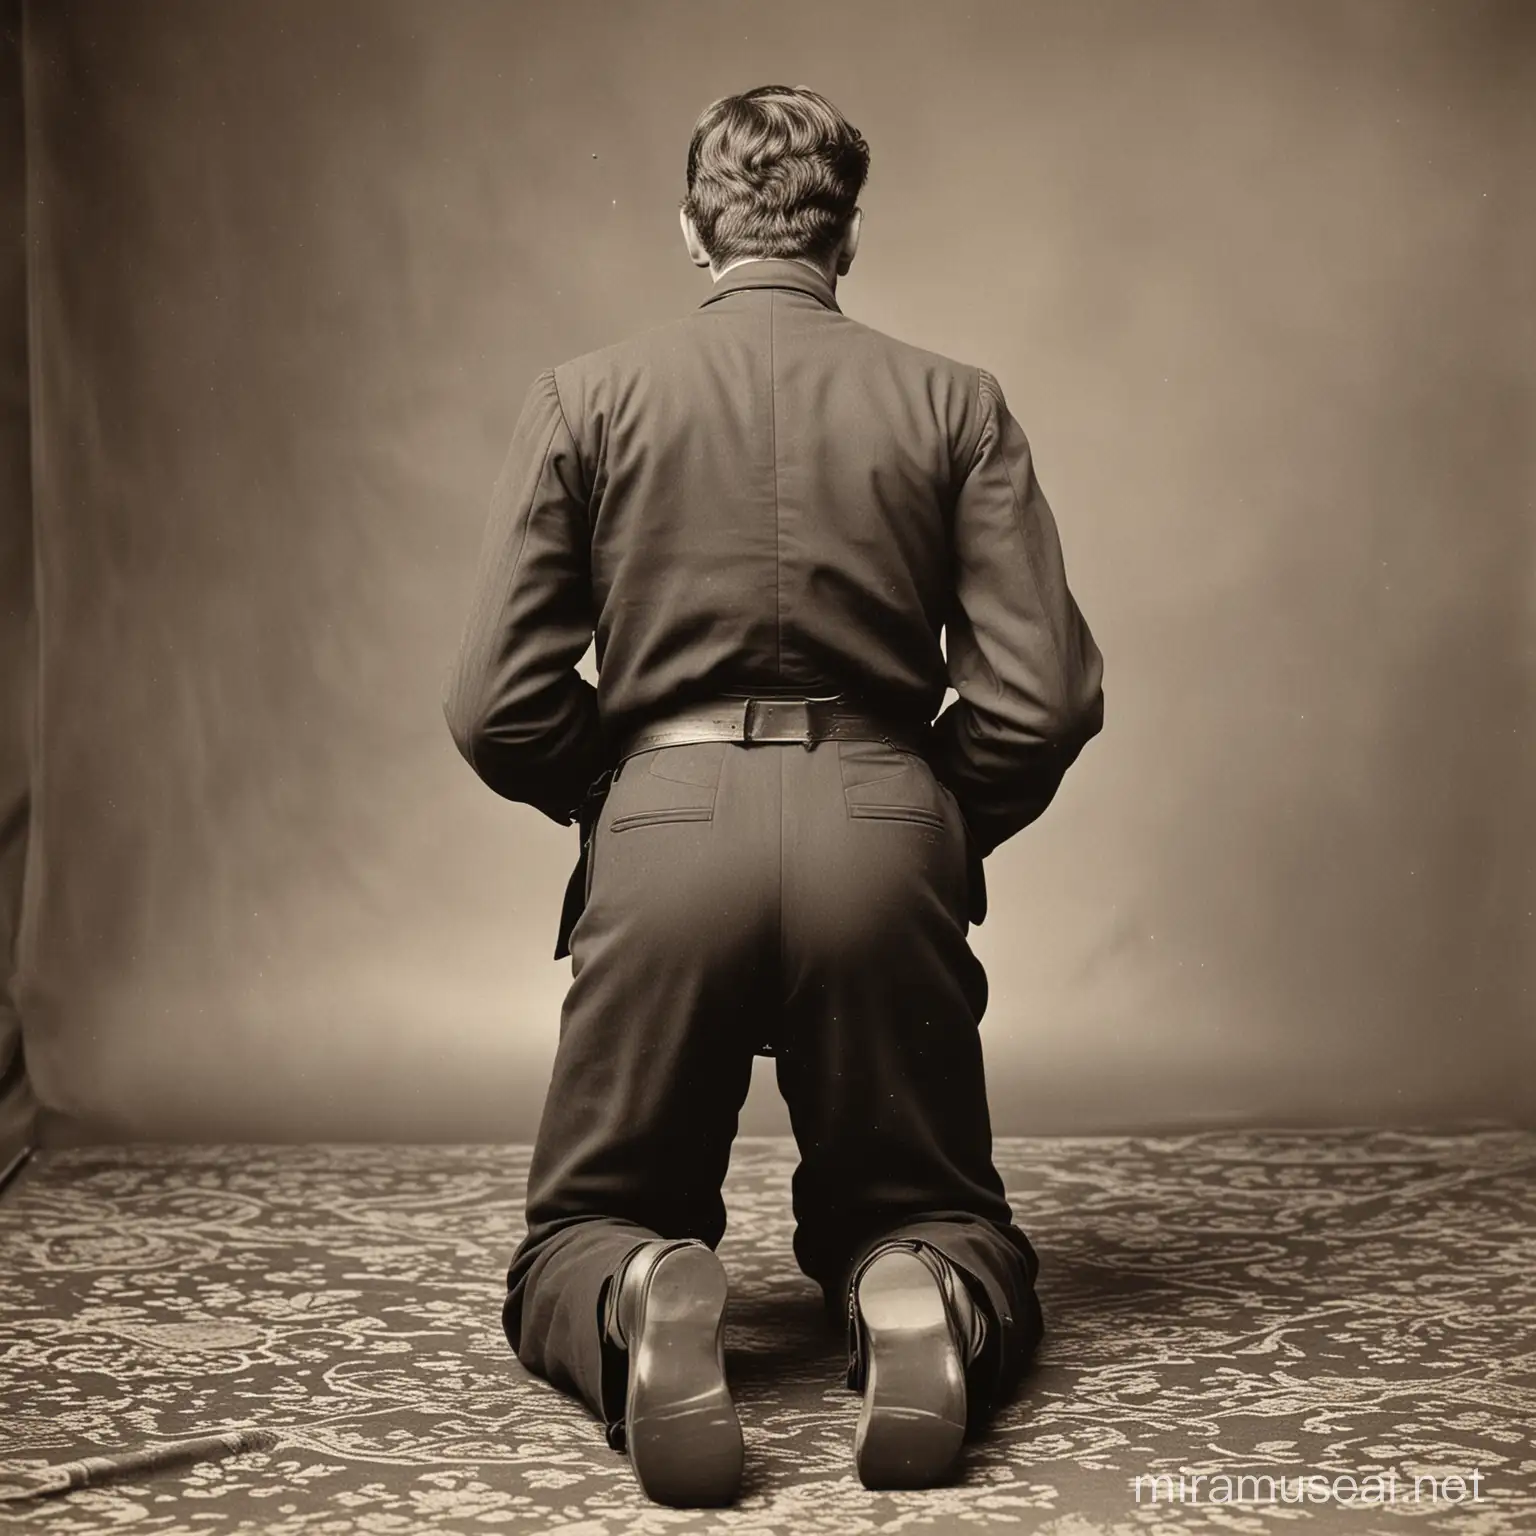 19th century monochrome photo taken in photo studio, full length rear view of a man kneeling on the floor, his back to the viewer